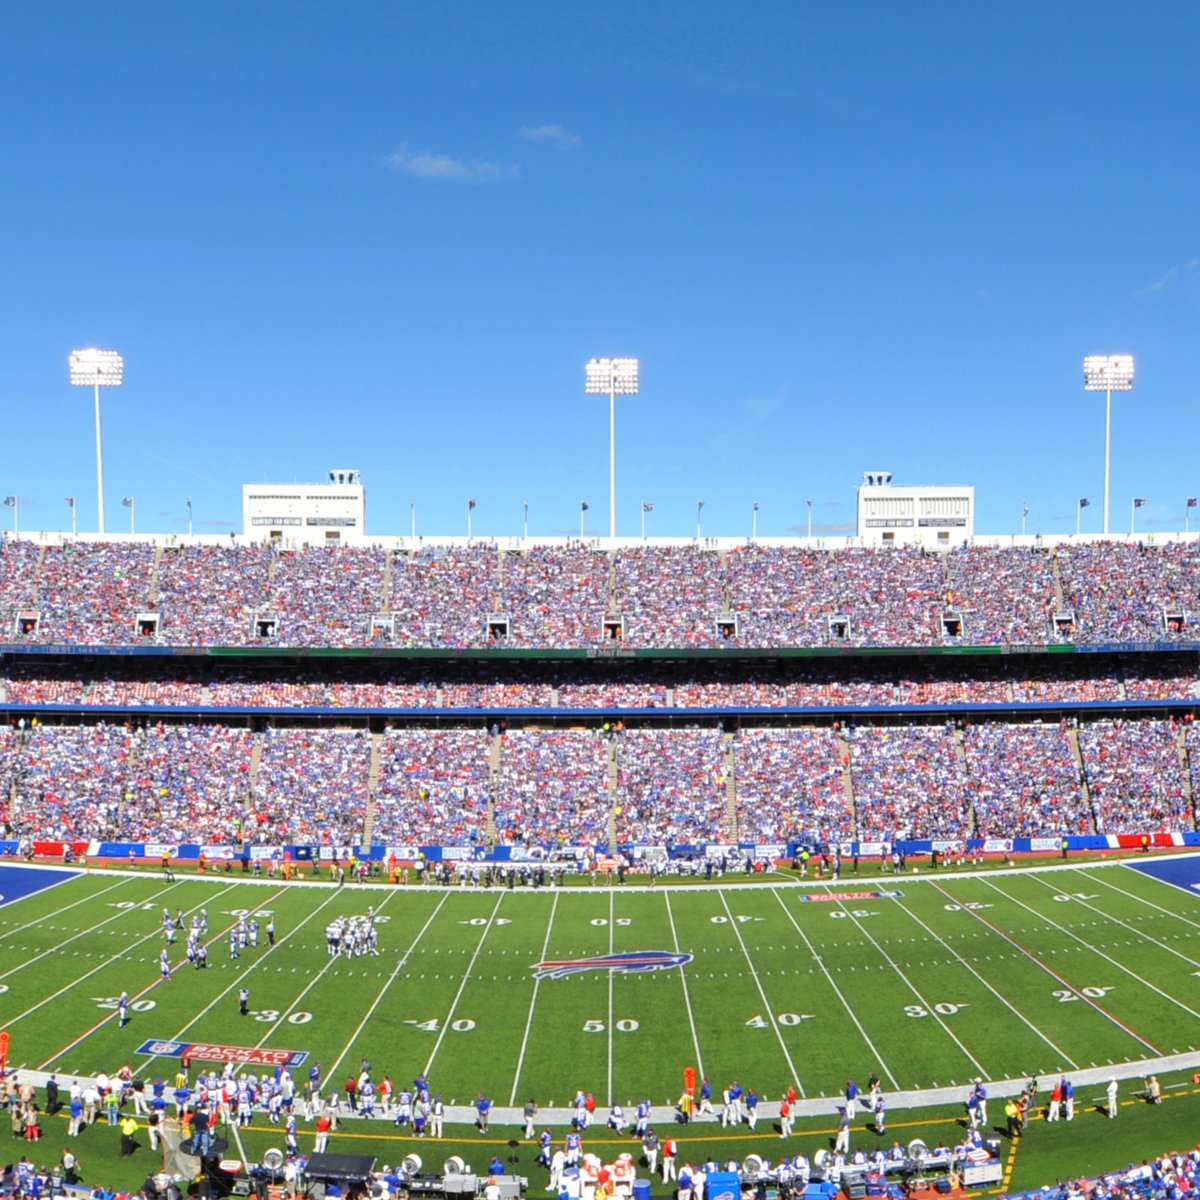 Here's how much an average ticket costs at each NFL stadium